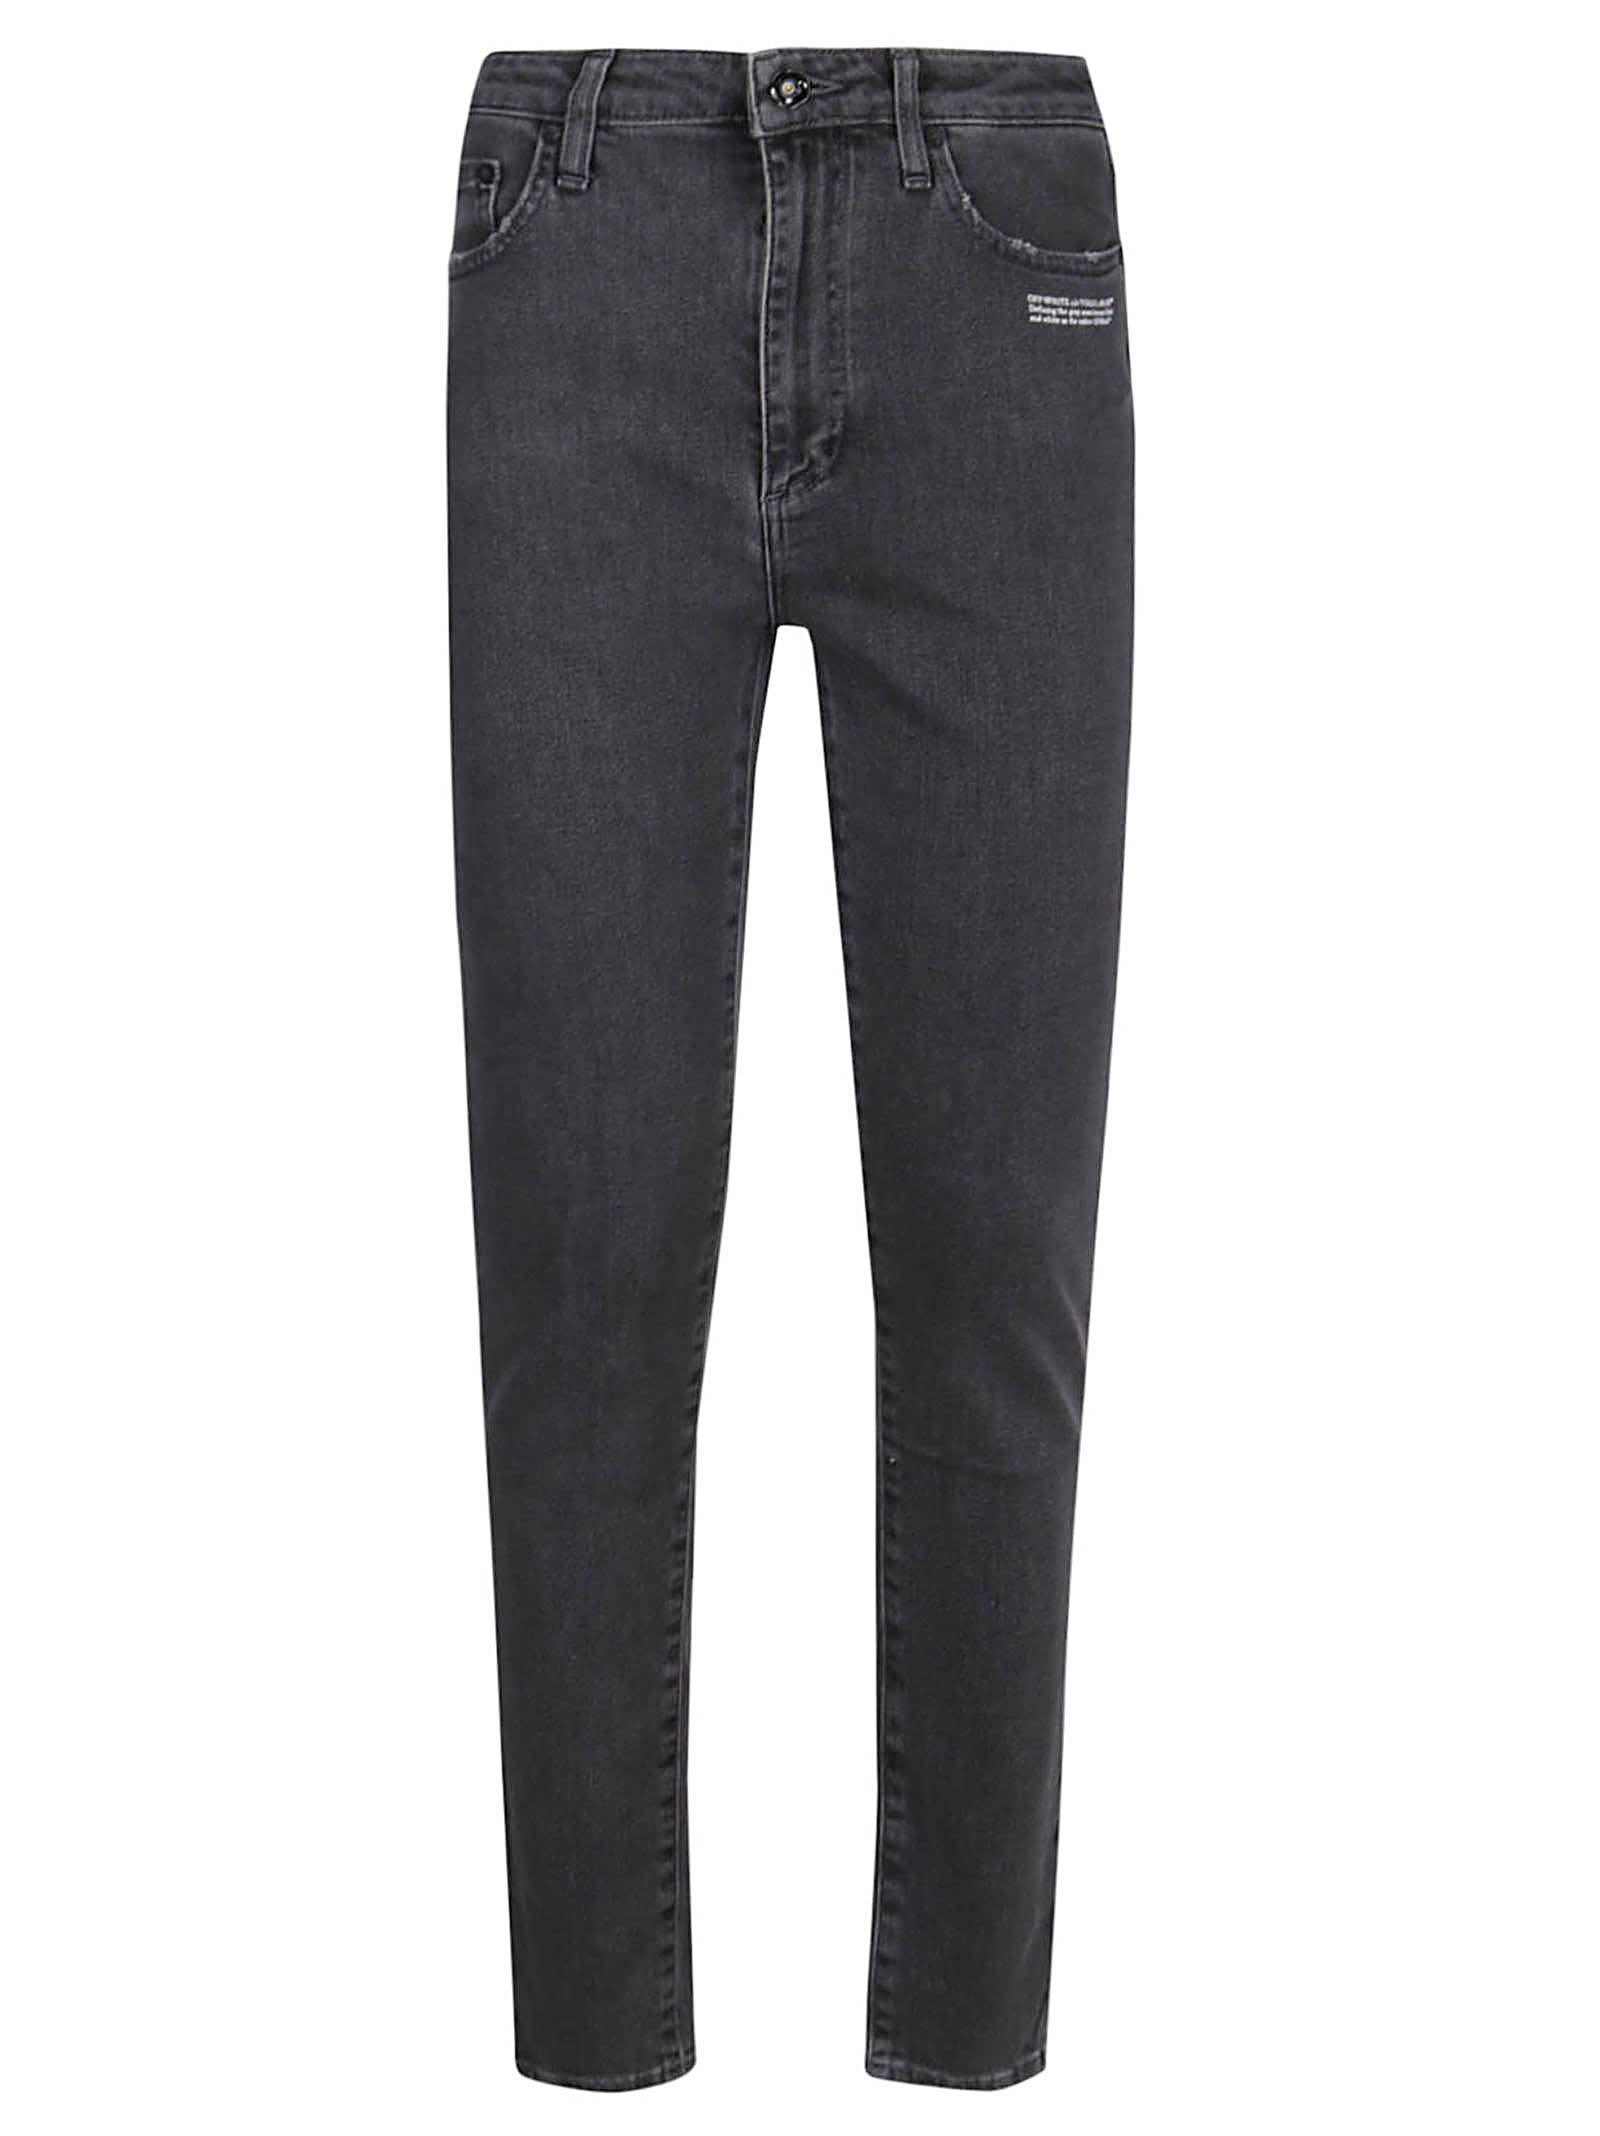 Off-White Corporate Skinny Jeans